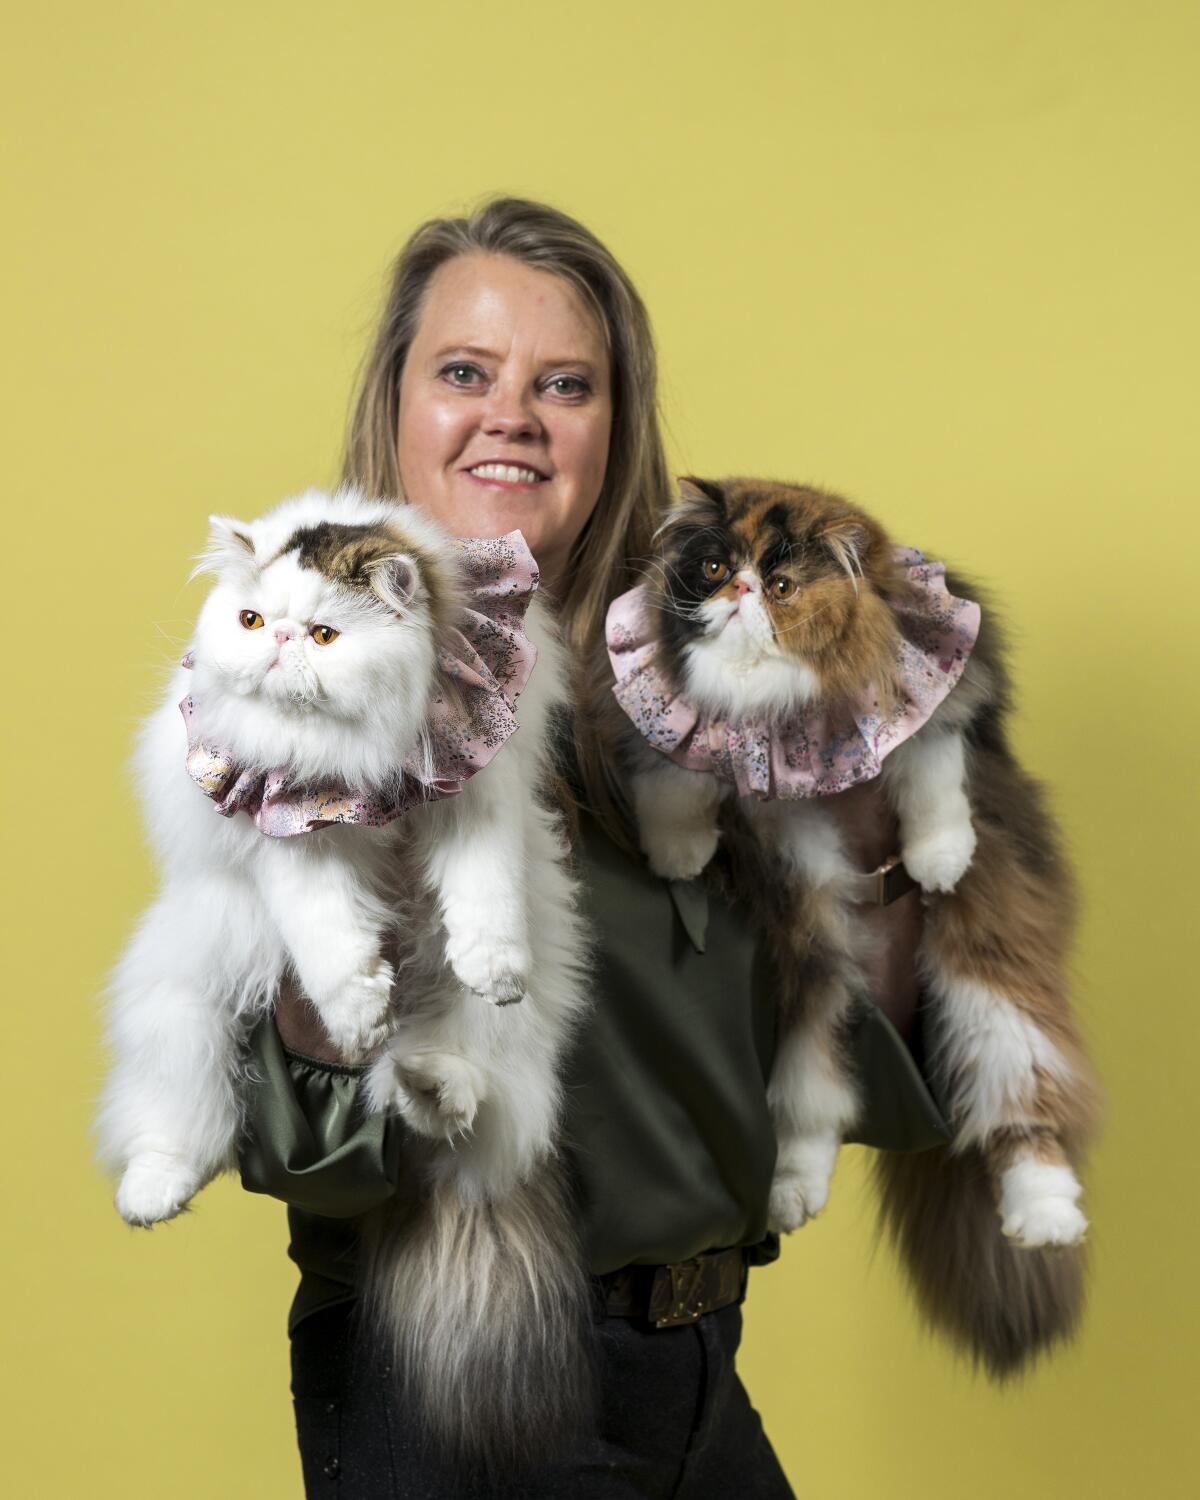 Anne-Charlotte Joseph holds her Persian cats Lunabelle, left, and Babybel, both wearing ruffled collars.